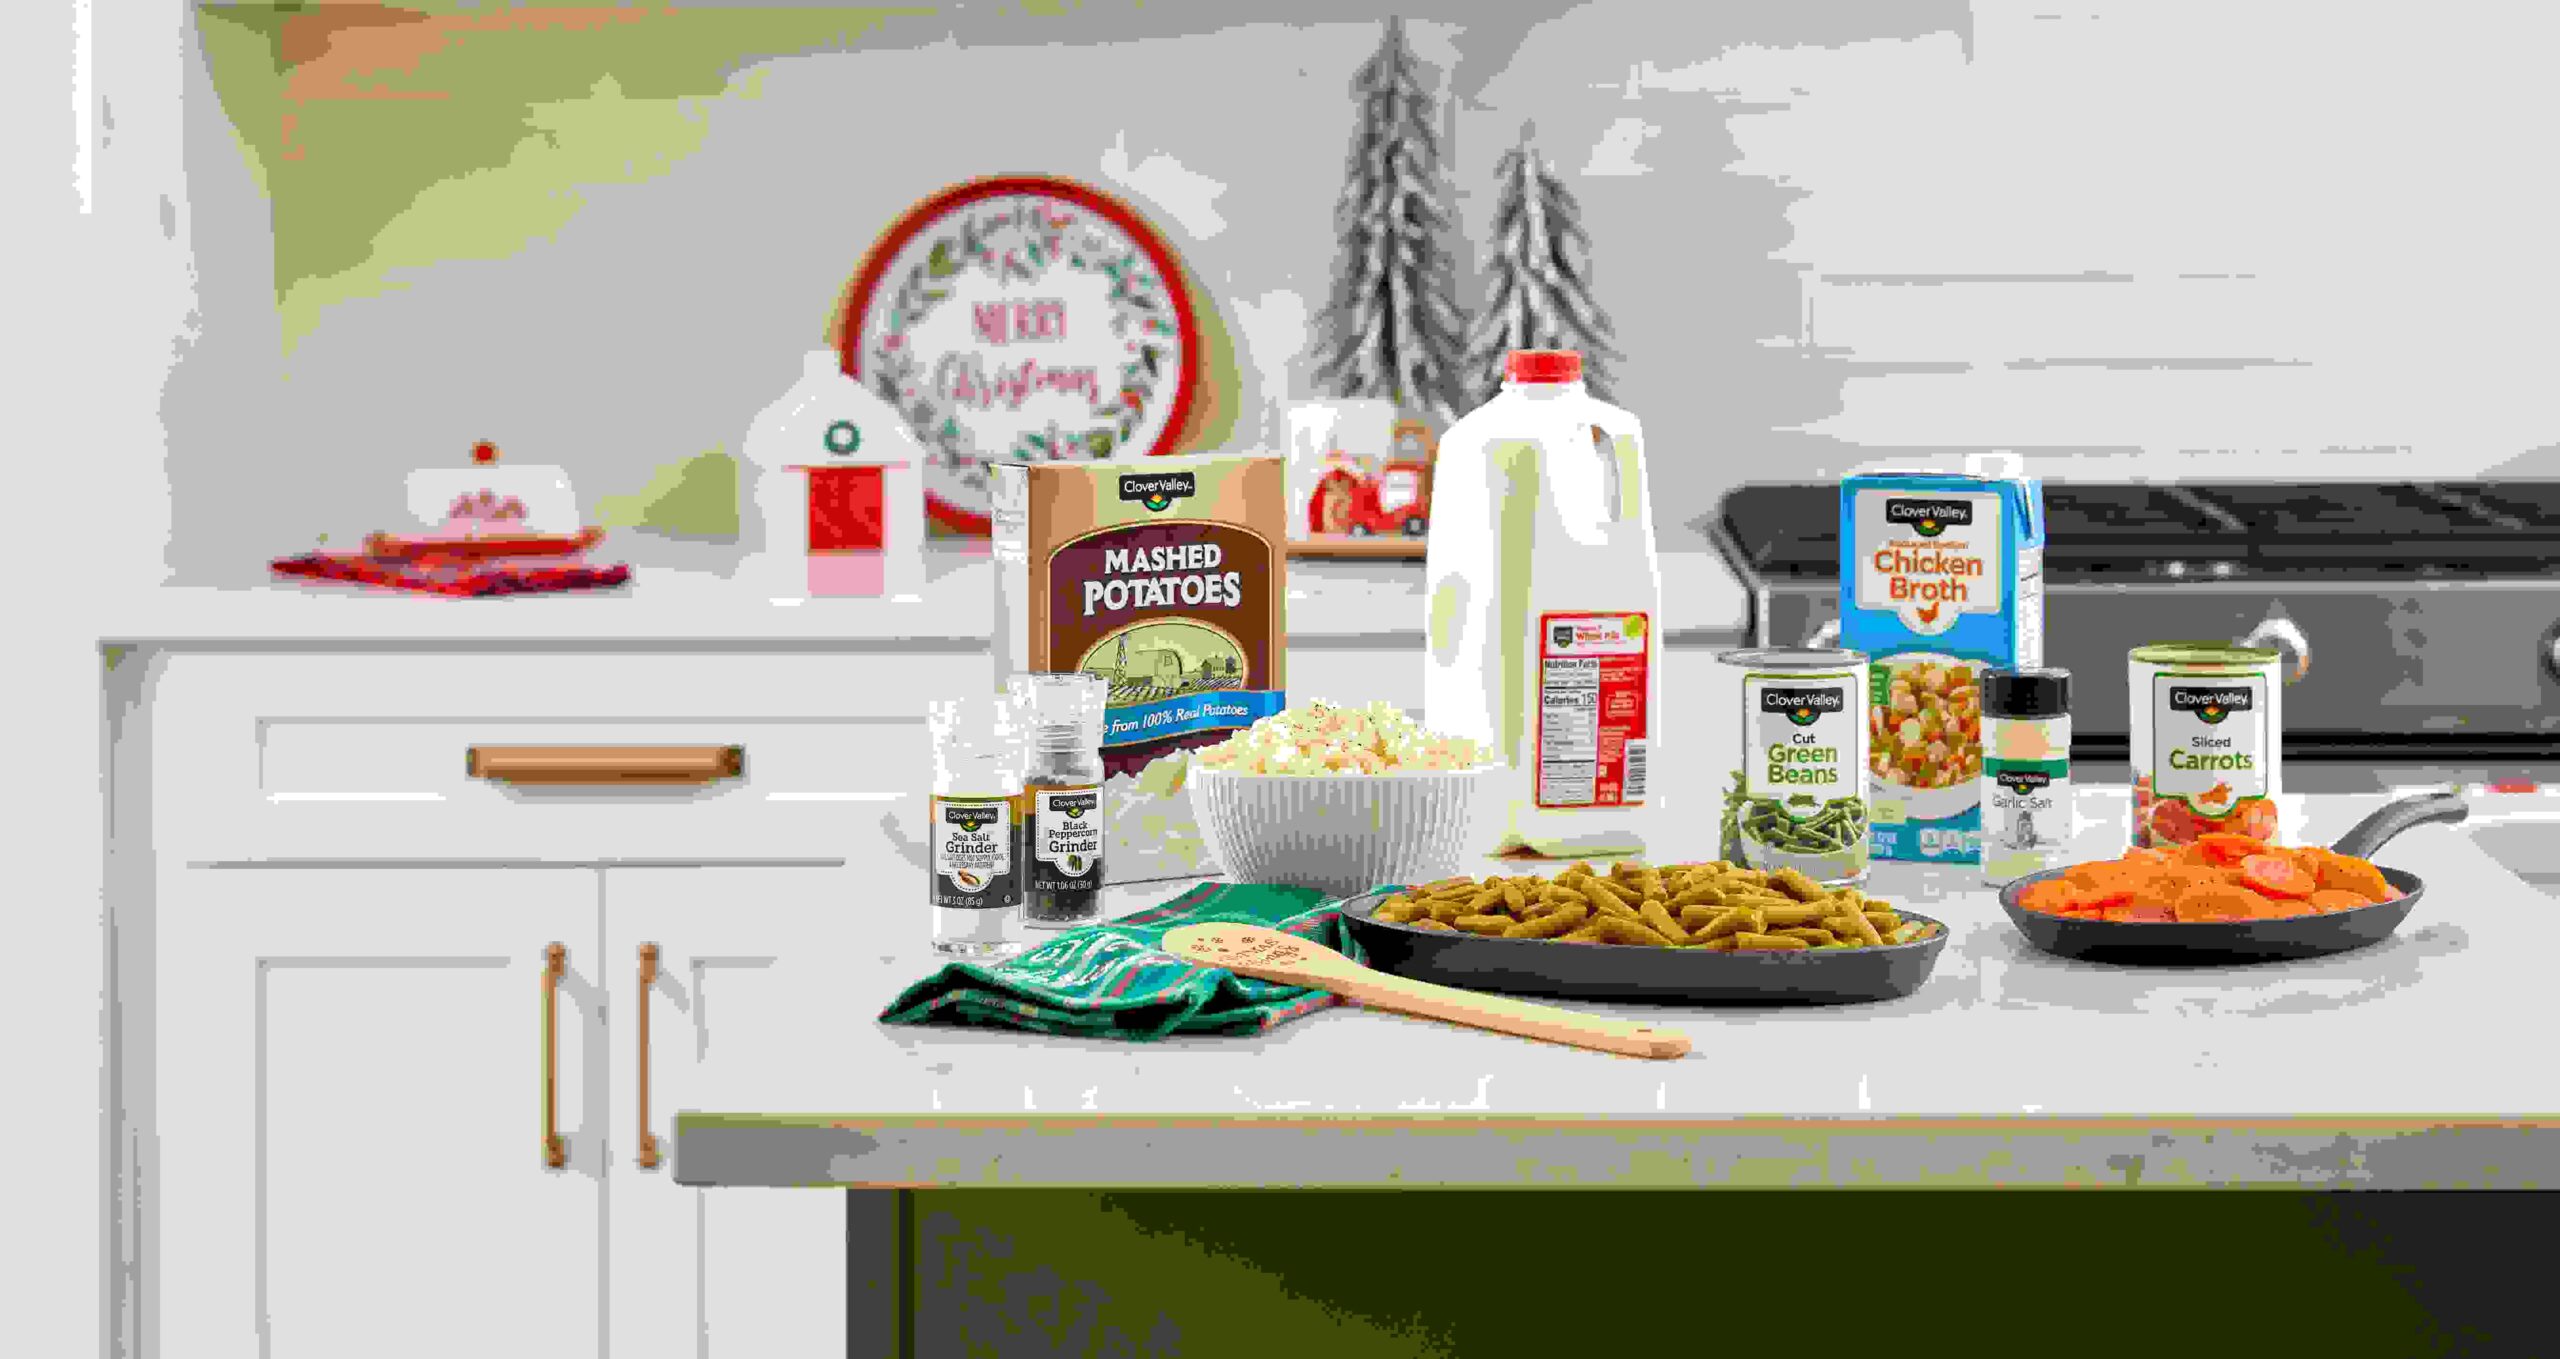 DG_Holiday_CloverValley_Meal-compressed